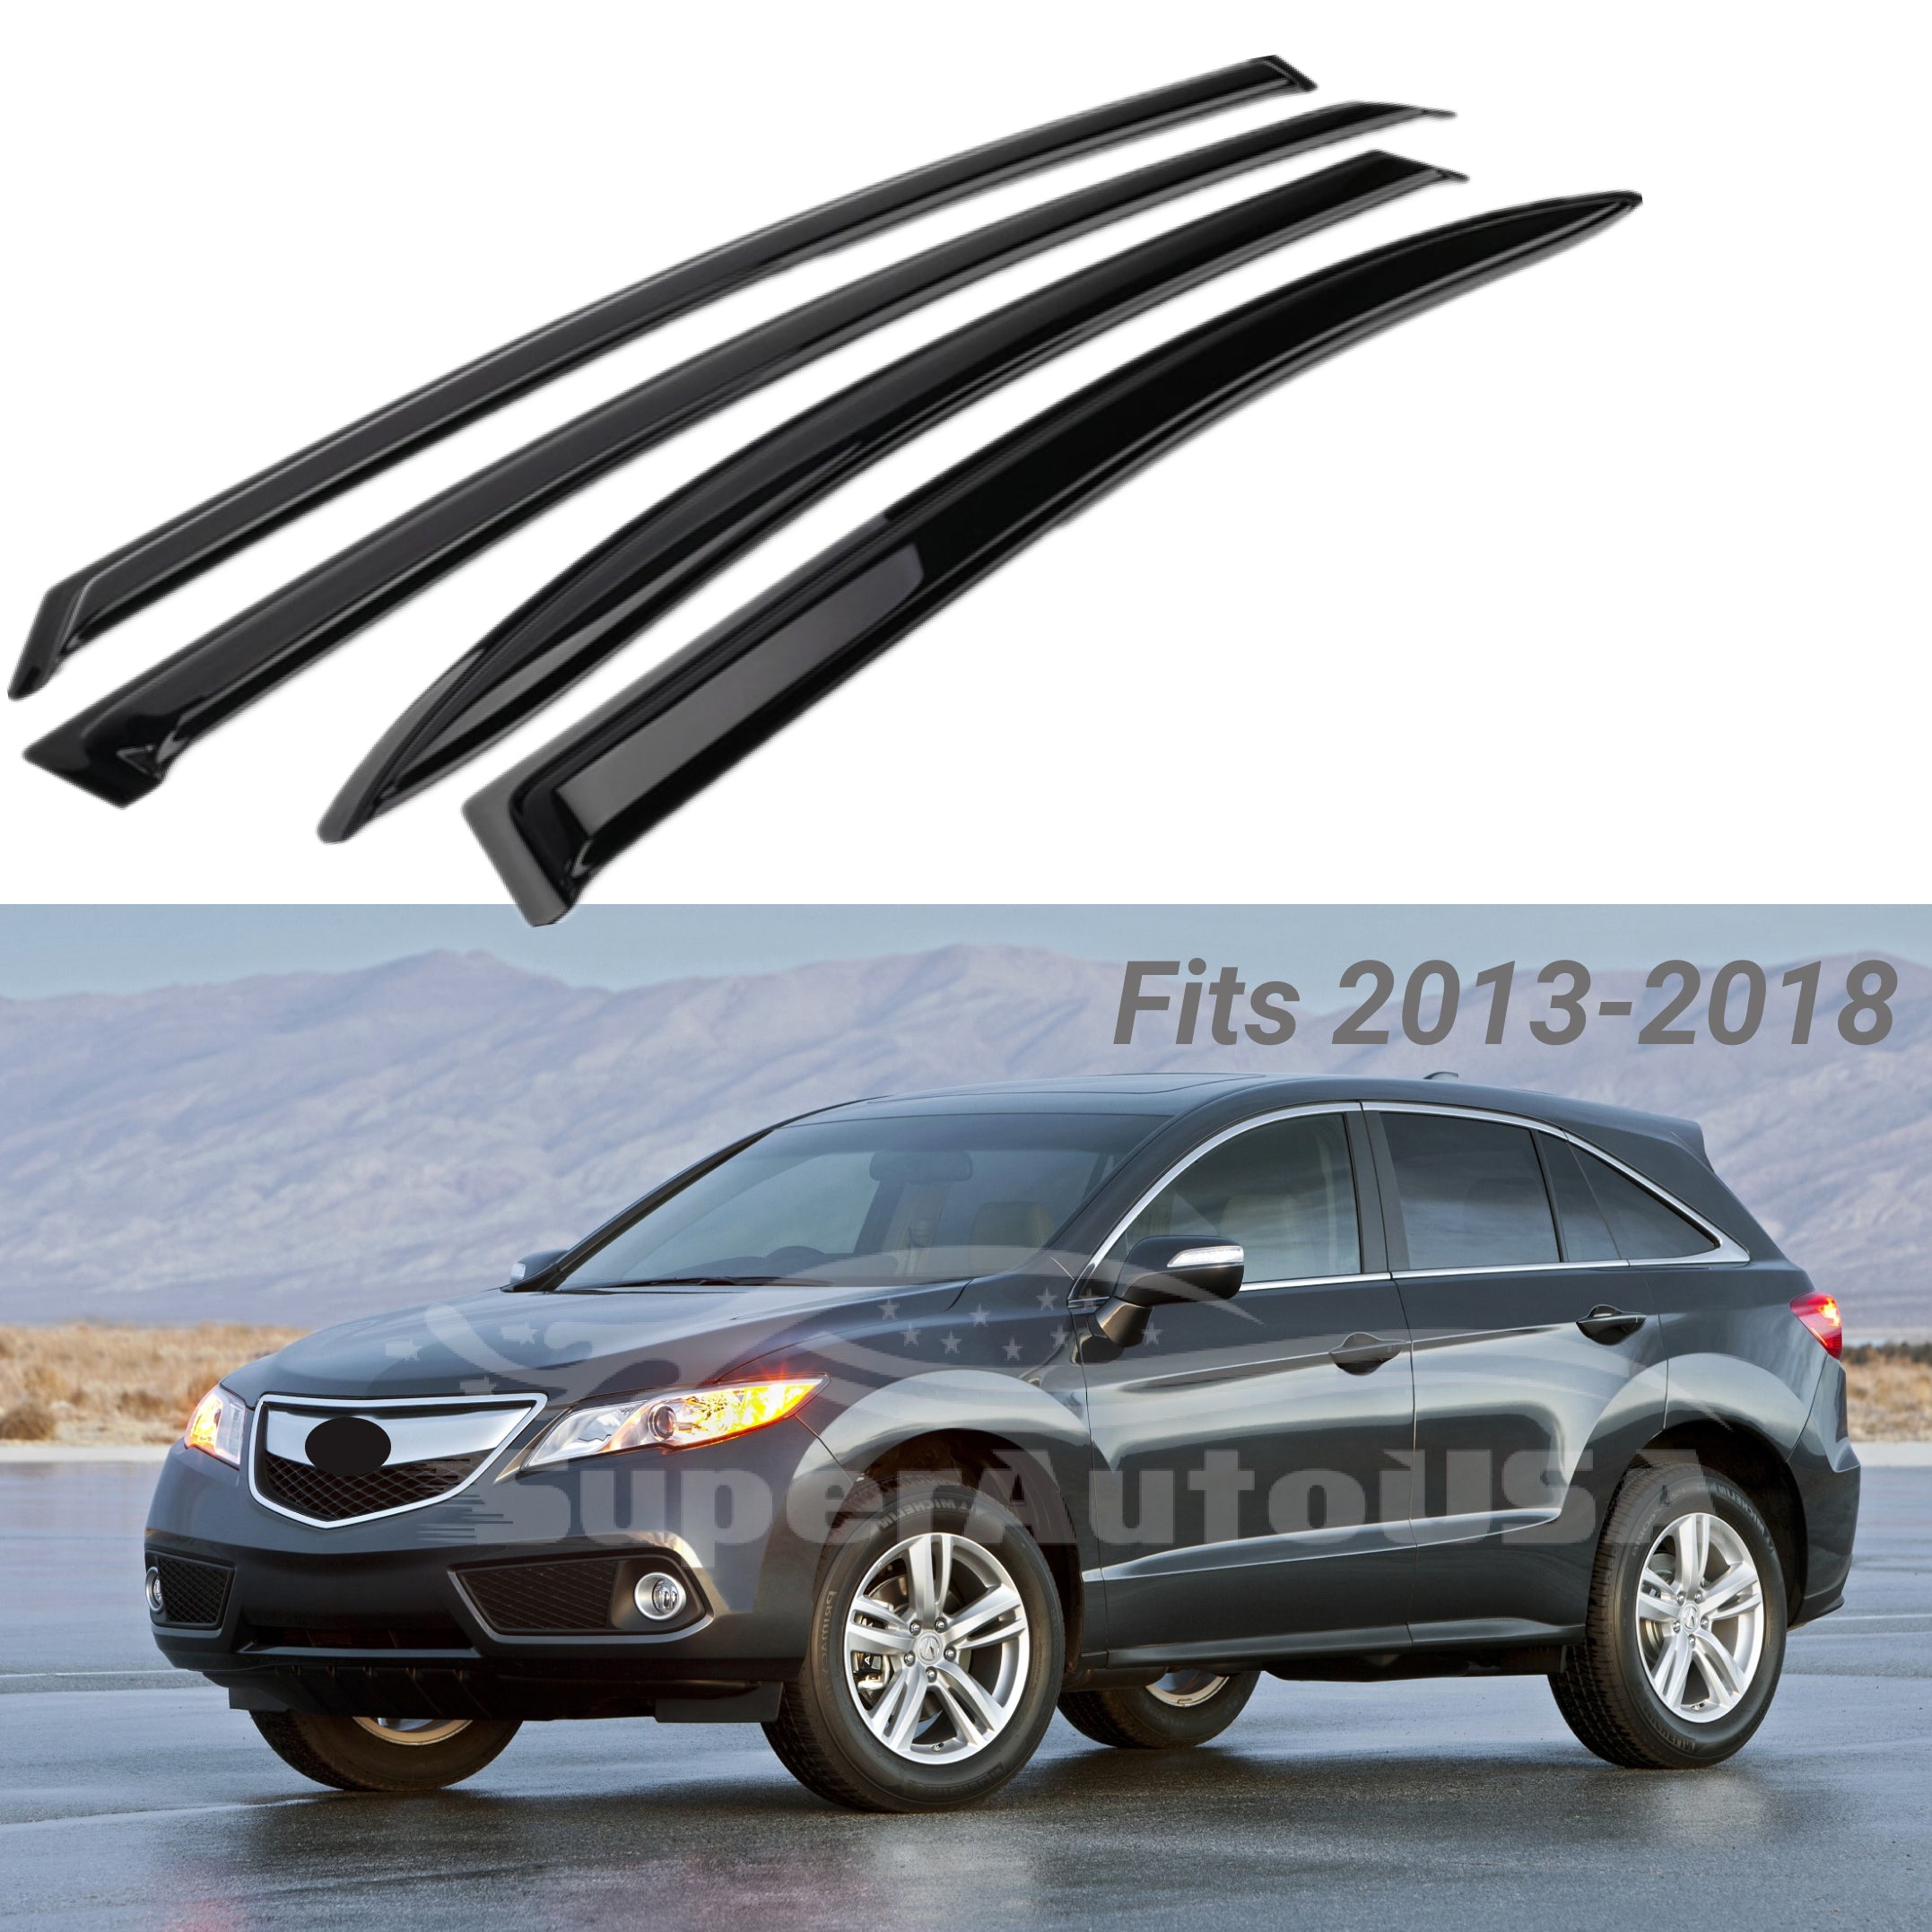 Fit 2013-2018 Acura RDX Out-Channel Vent Window Visors Rain Sun Wind Guards Shade Deflectors - 0